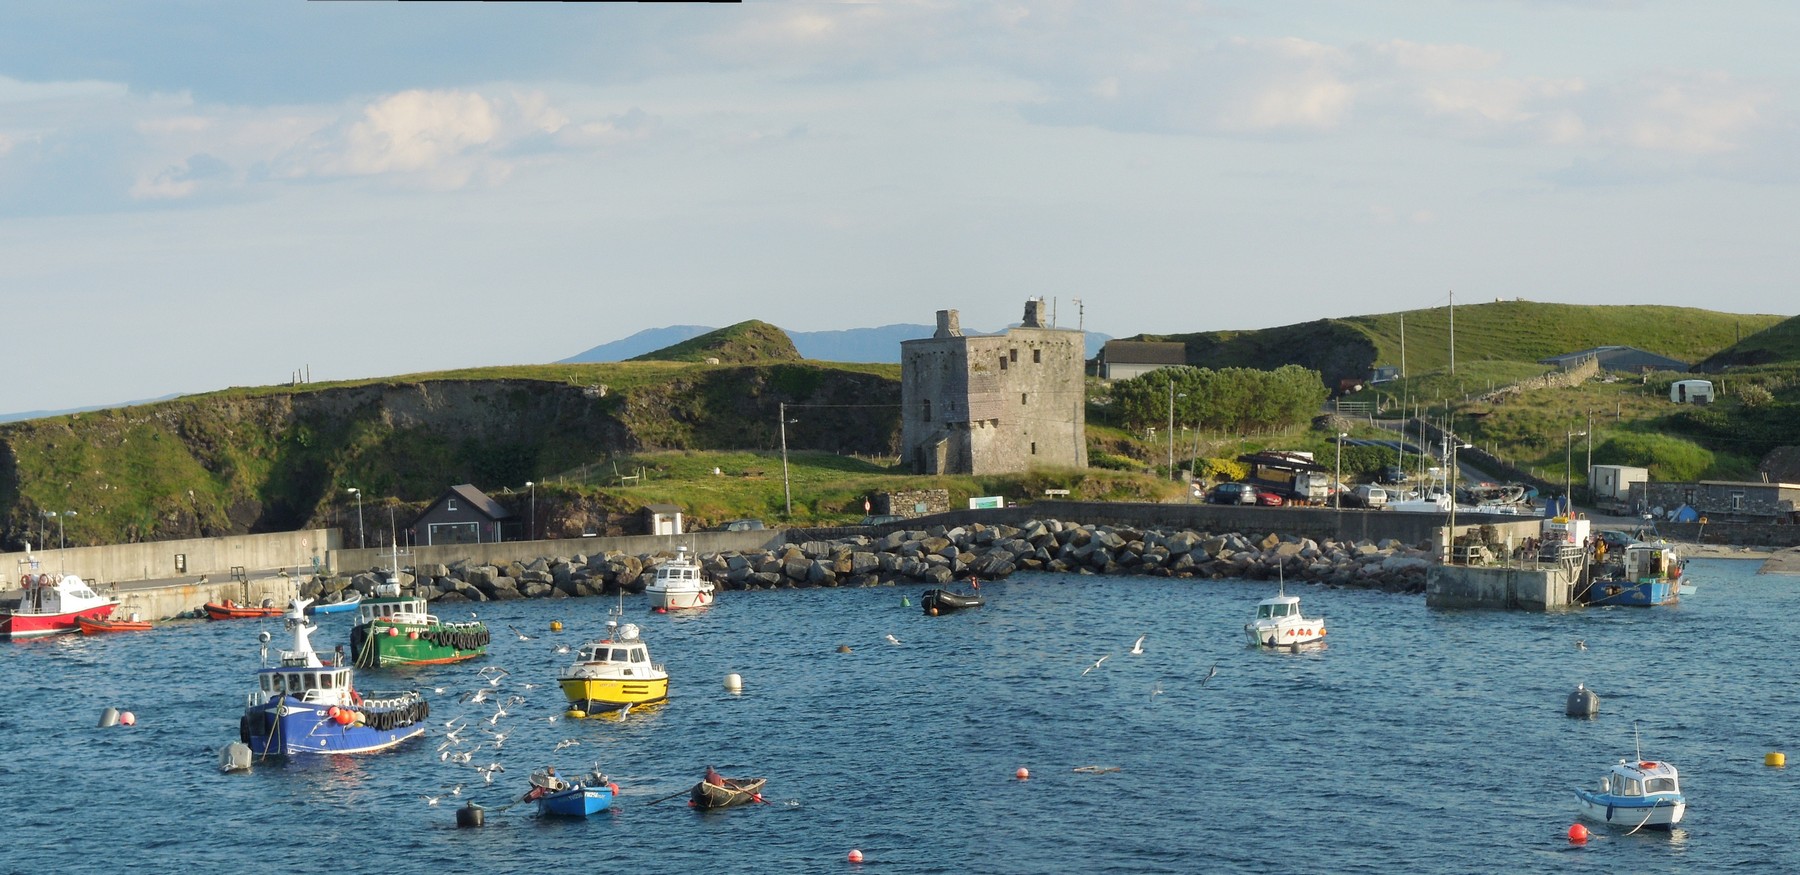 The island's main harbour overlooked by Grinne Uaile's tower house which dates from about 1500.